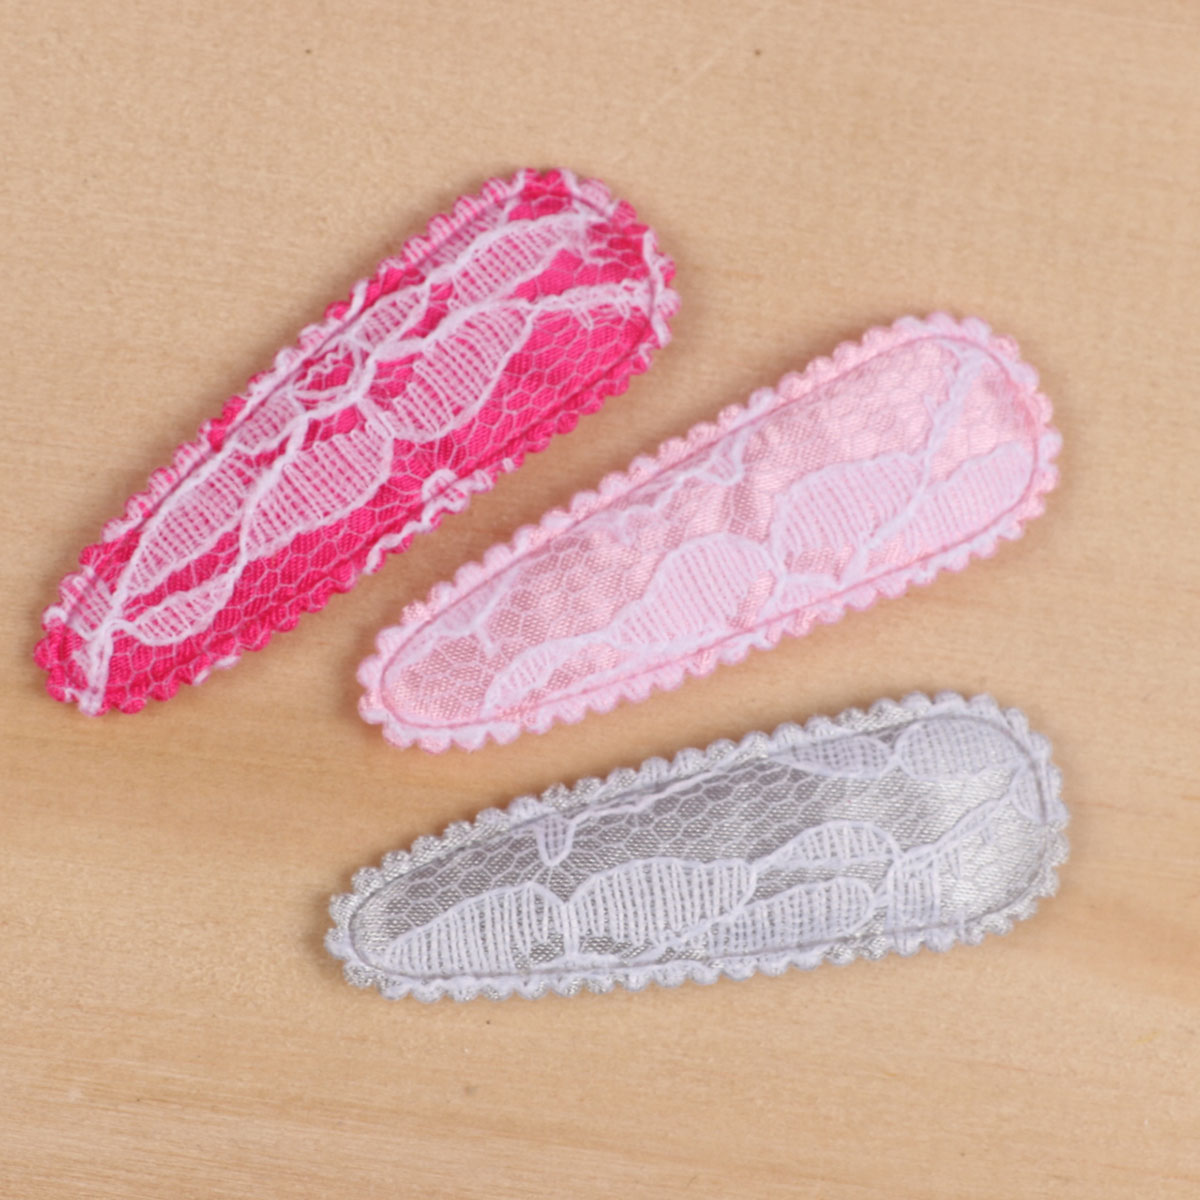 60 Satin Lace 55mm Hair Clip Cover-3 Colors CP020